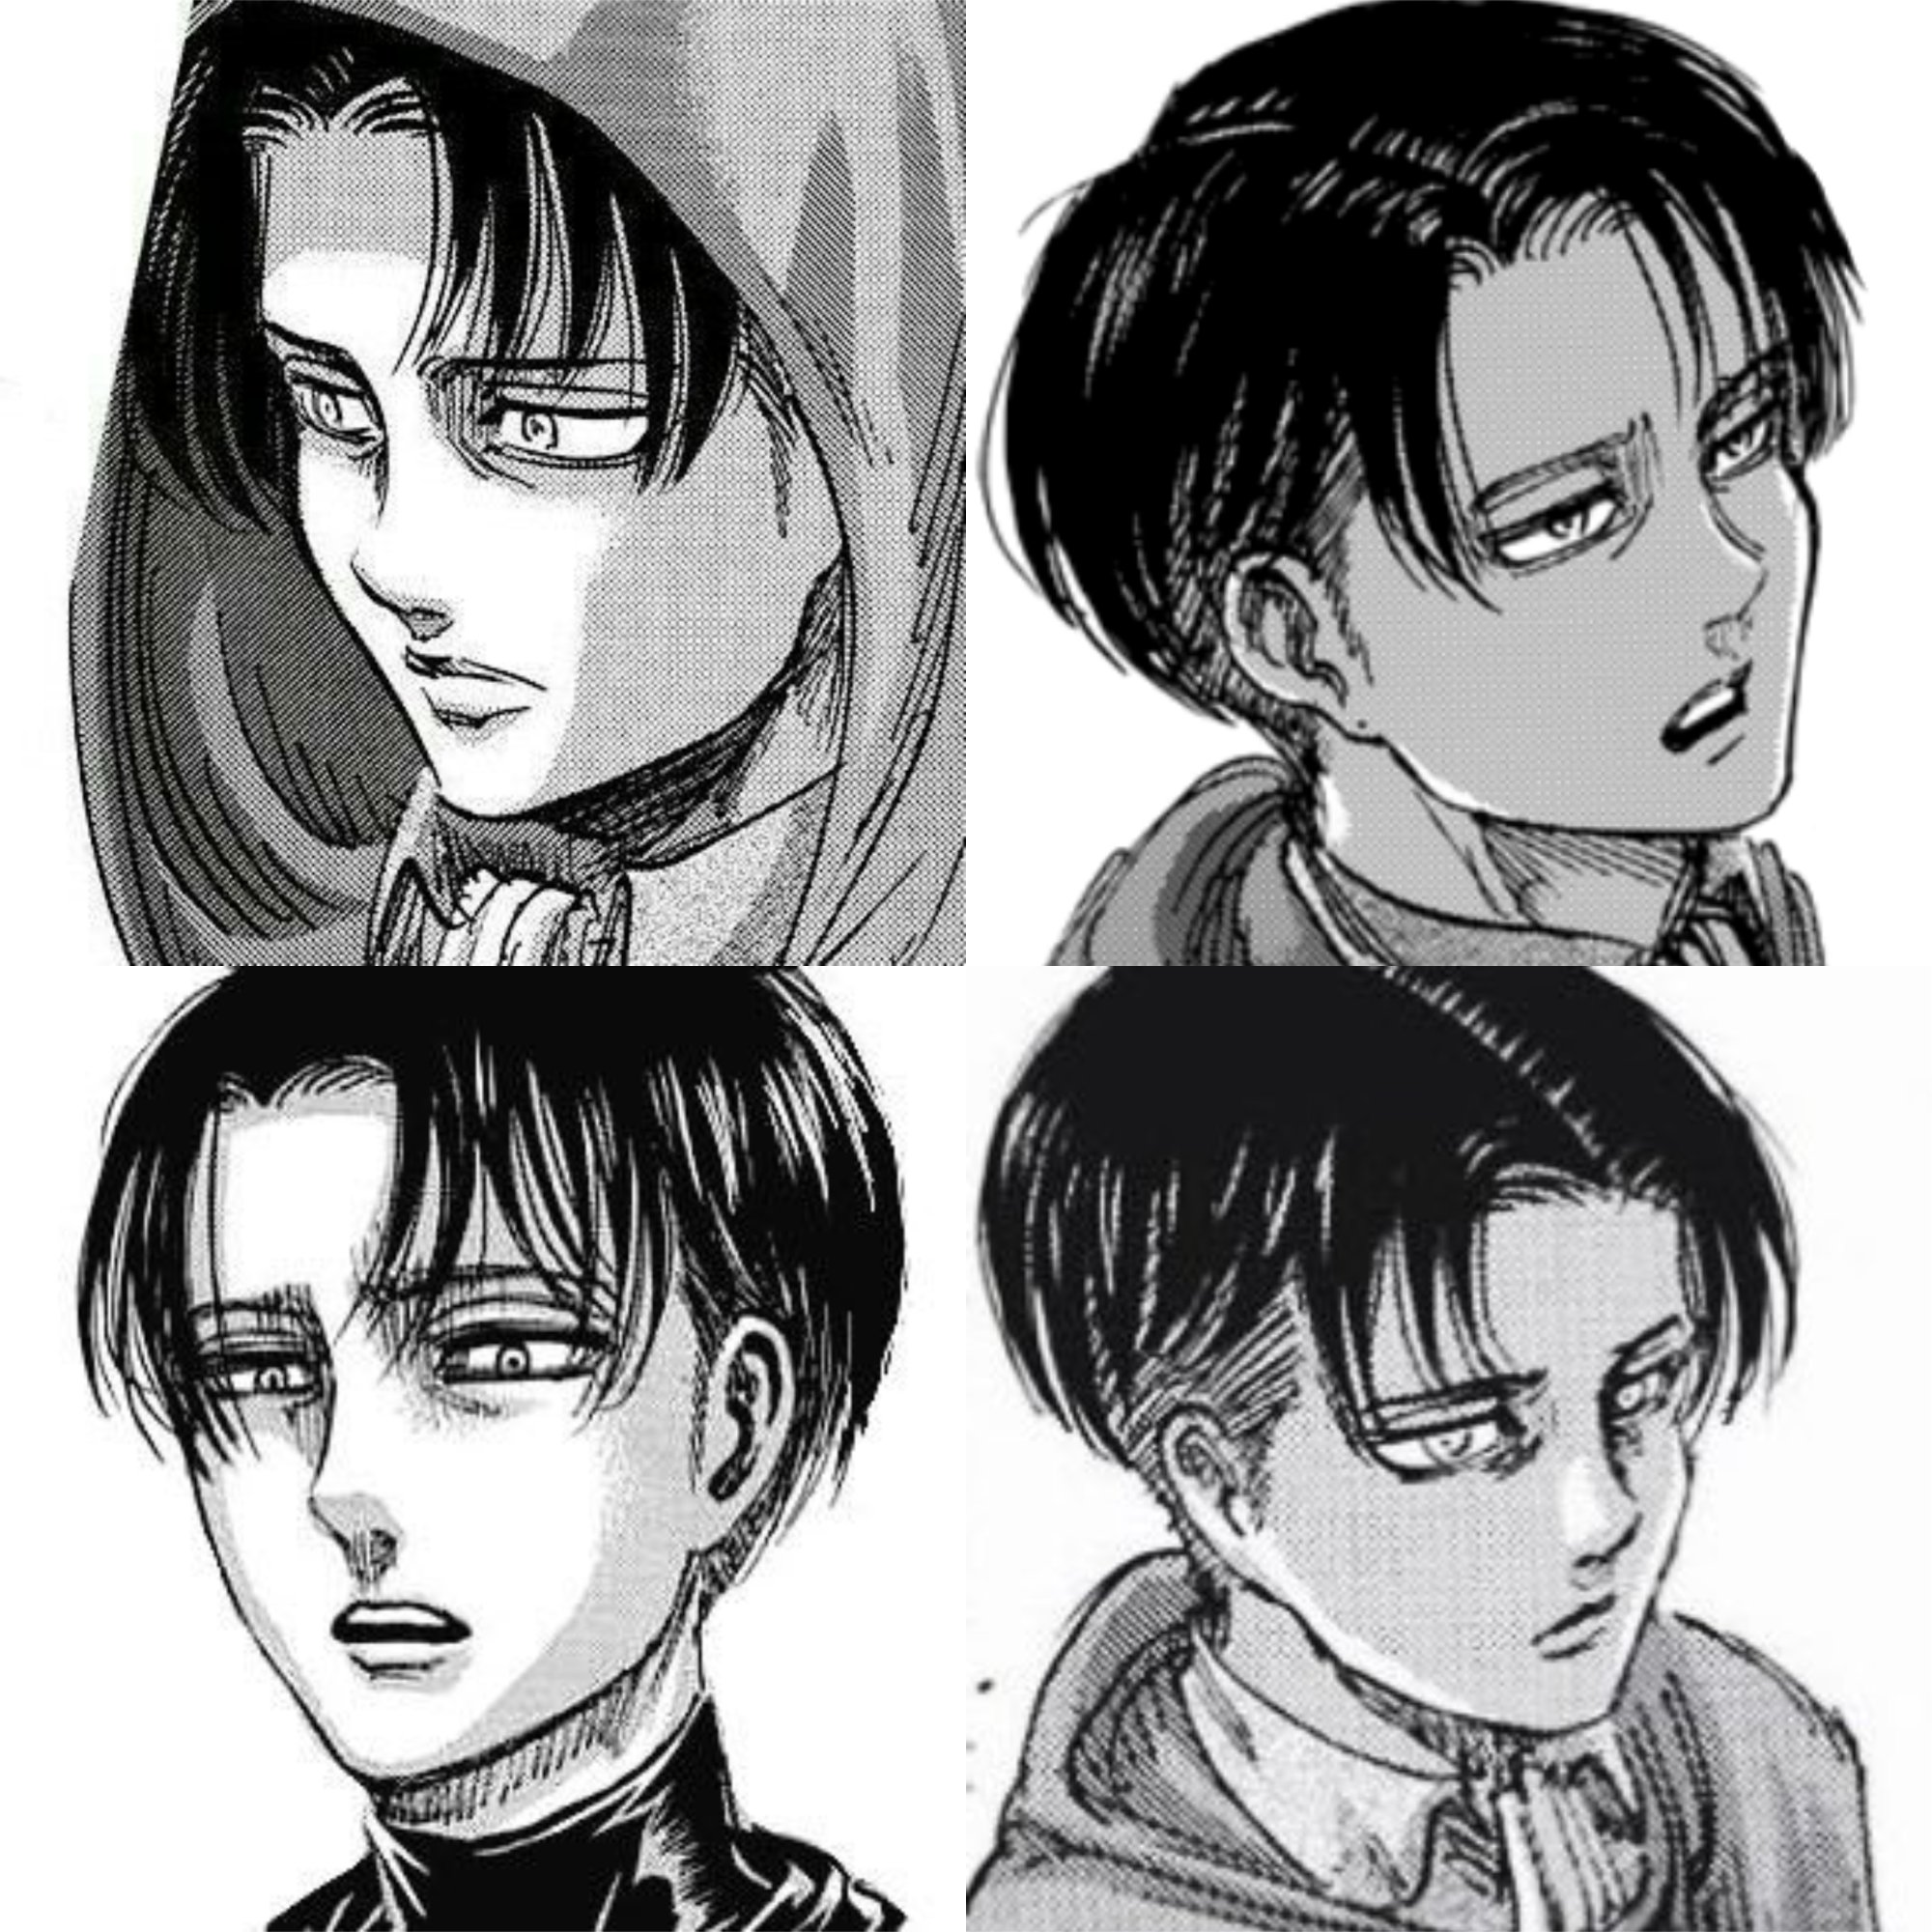 daily levi Twitter: and Mappa did well but manga Levi Ackerman on another level https://t.co/jfV2S3cFHT" / Twitter